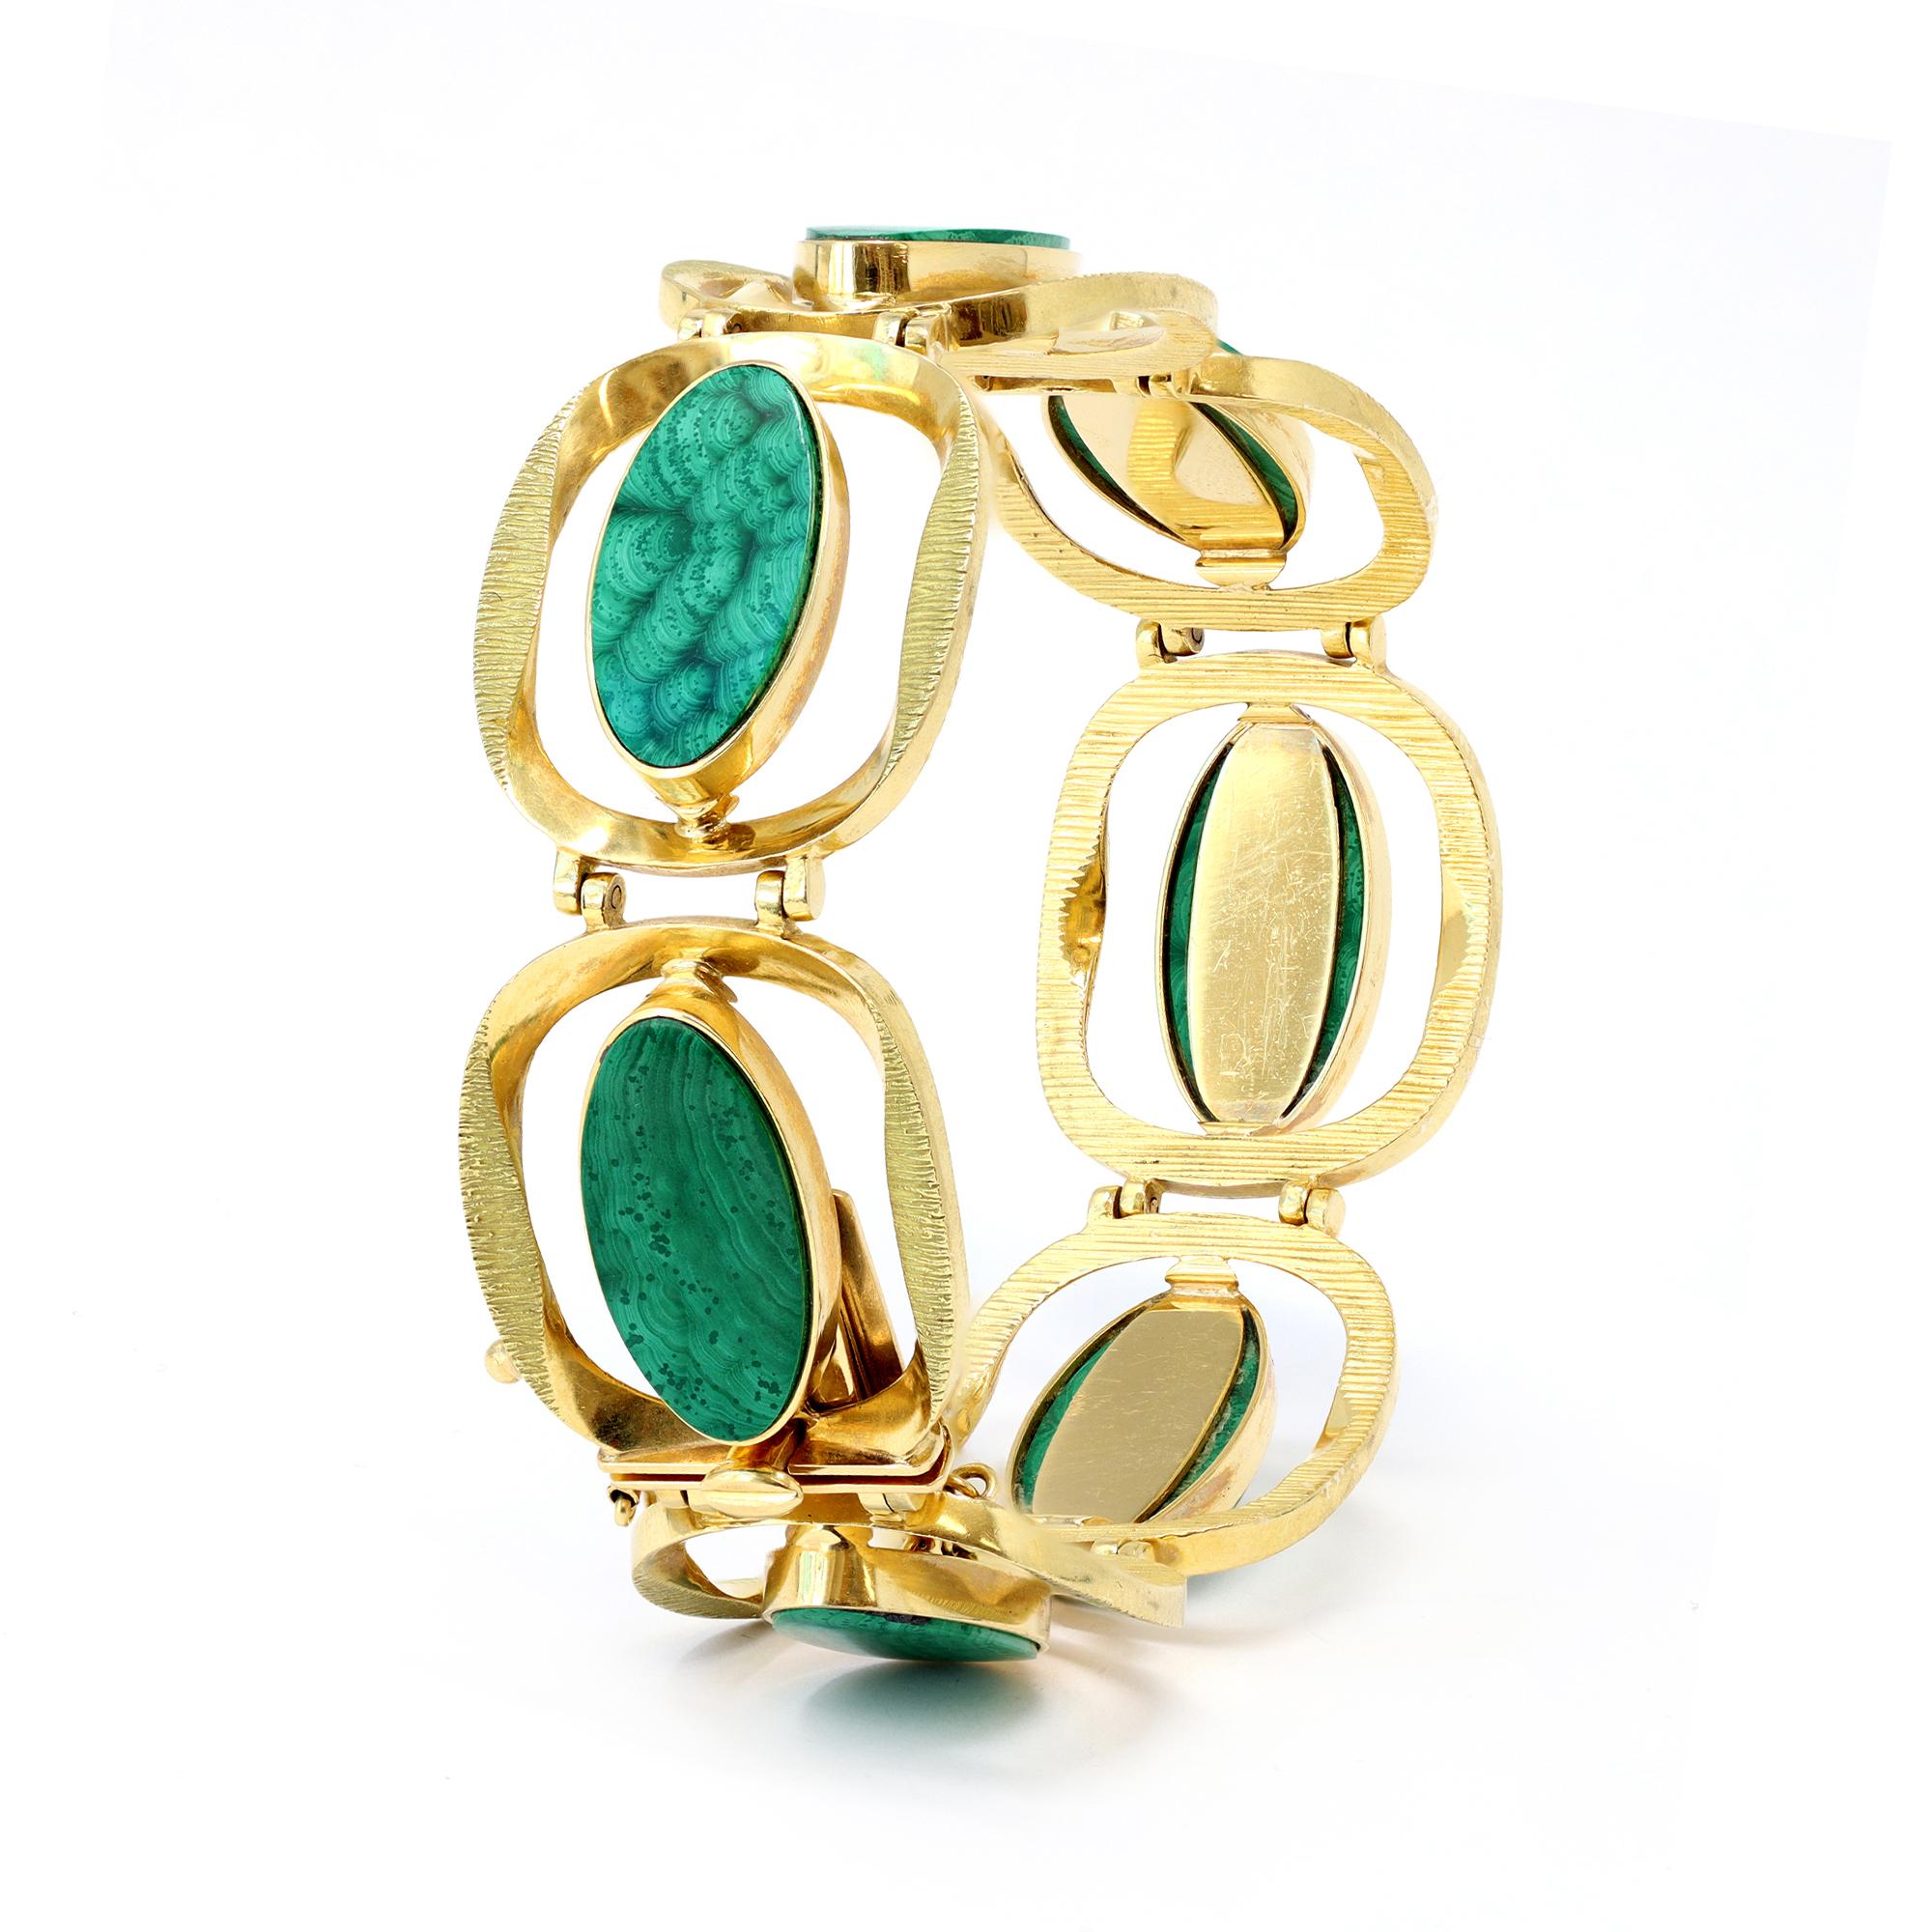 Yellow gold and malachite bracelet, circa 1960, designed as a series of semi circular textured gold links set in the center with oval malachite sections. The gross weight of the bracelet is 63.5 grams, with a length of 7 ½ inches, and it is 1 inch